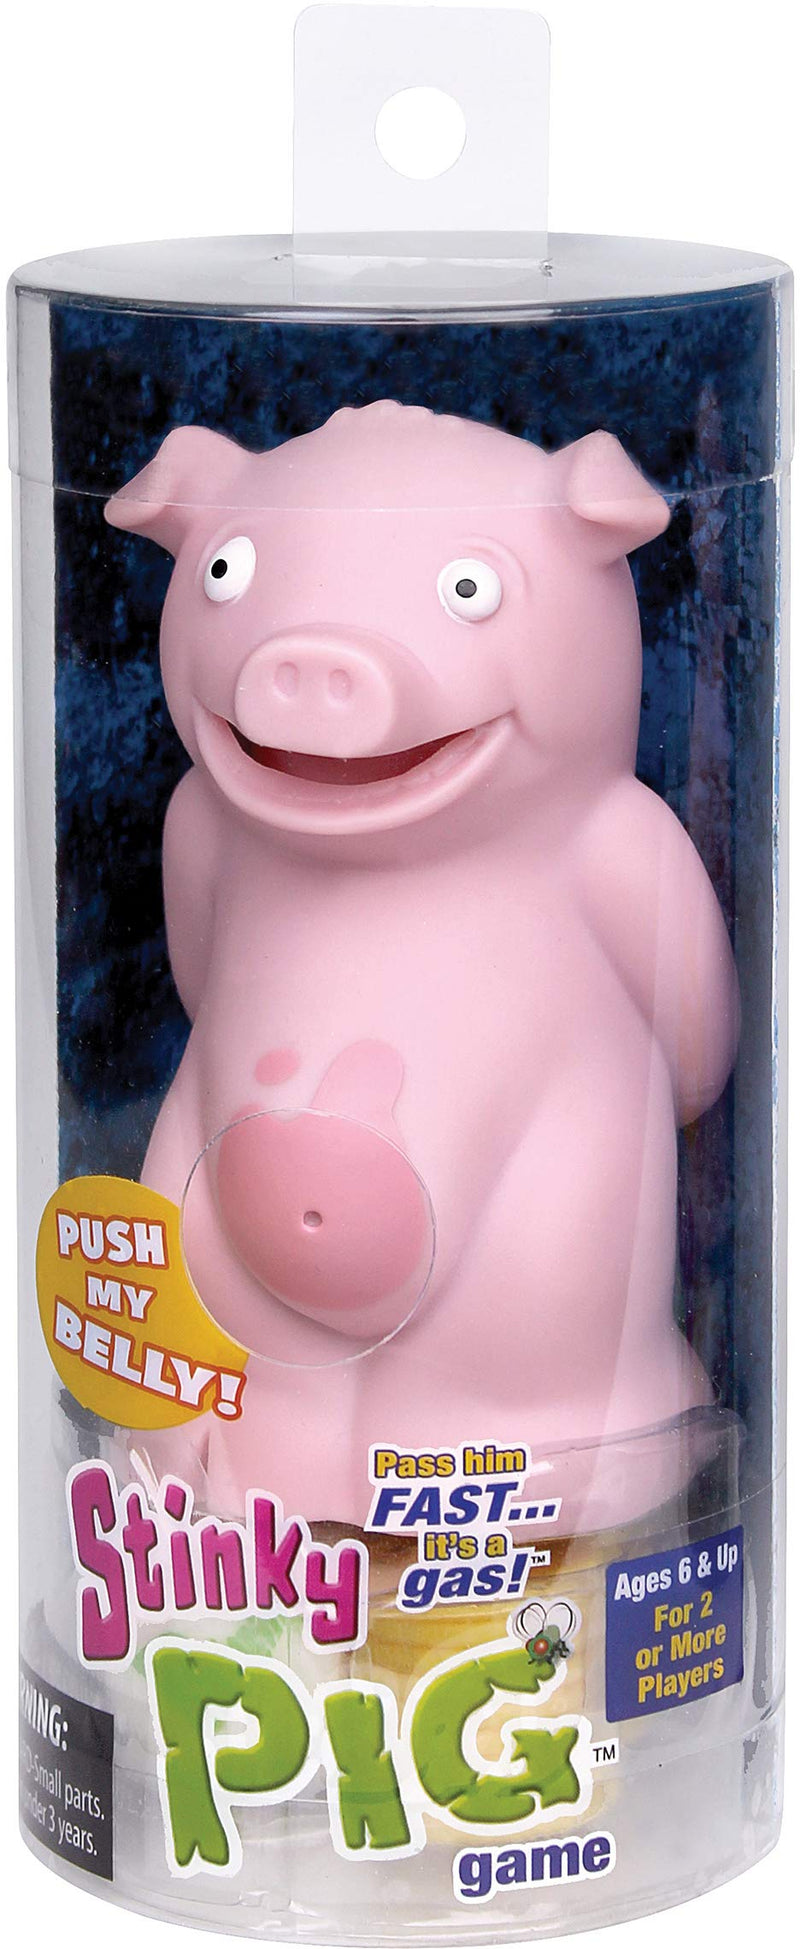 Game (Ages 5 & Up)

PlayMonster Stinky Pig Game (Ages 5+)